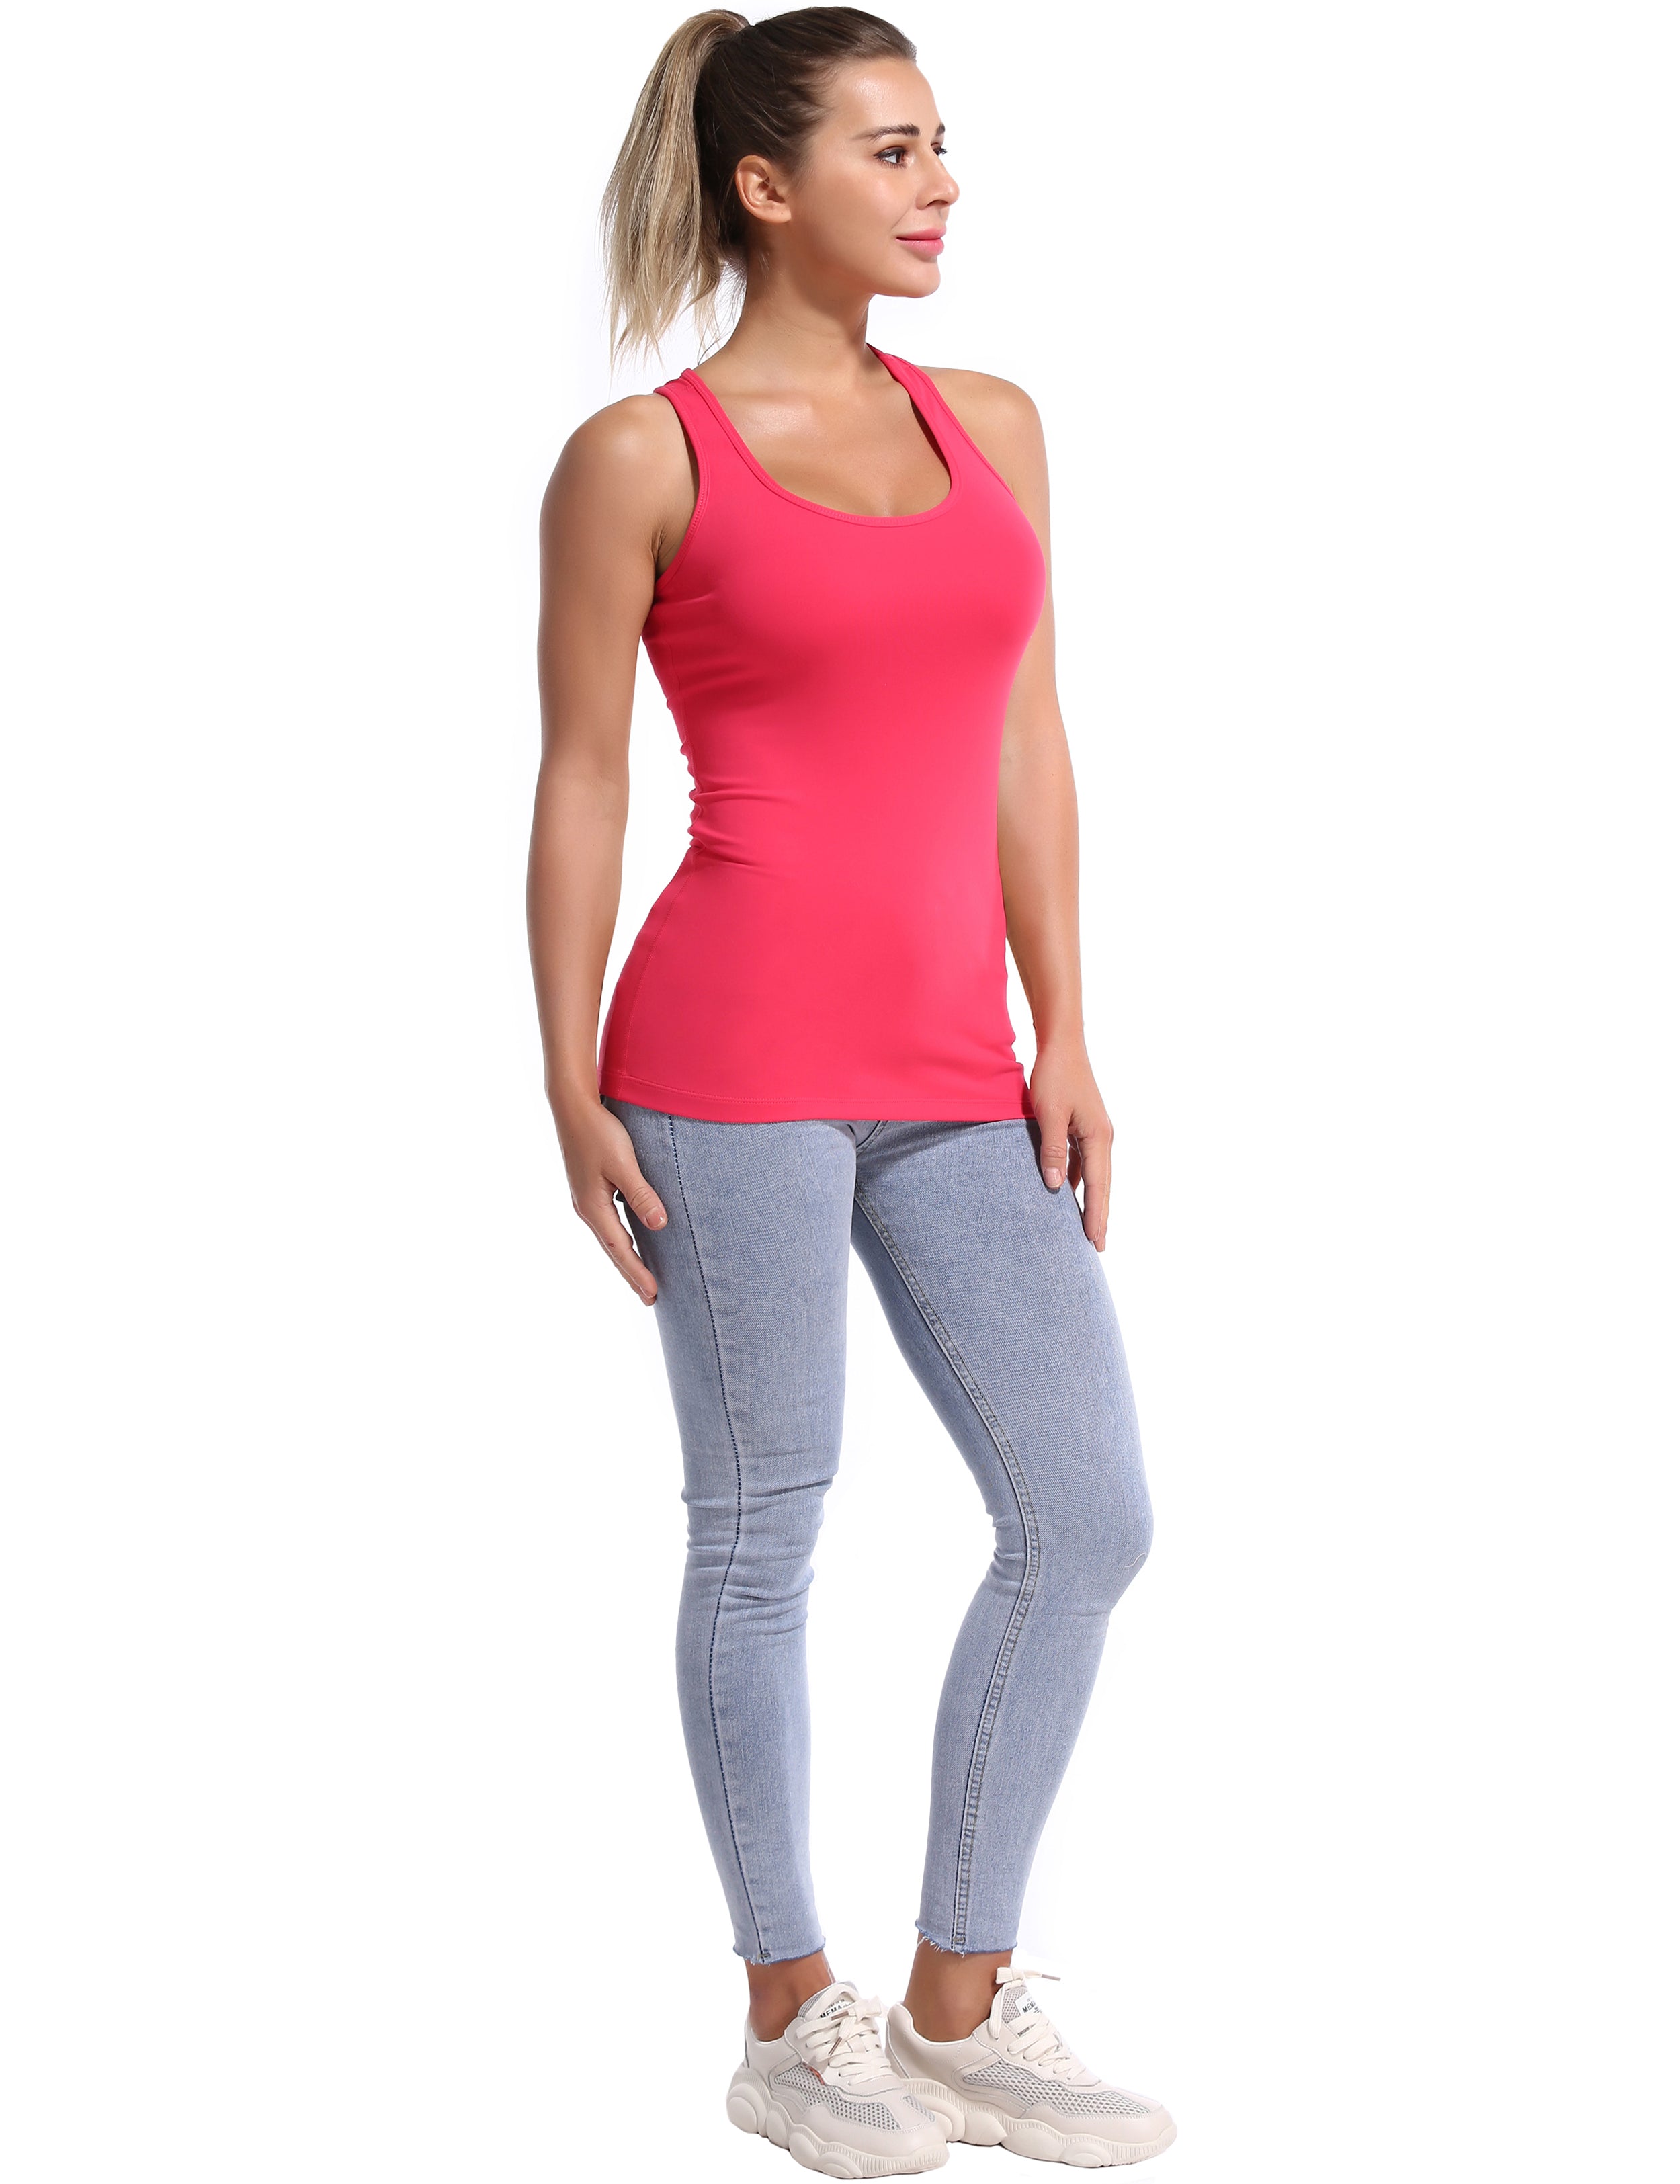 Racerback Athletic Tank Tops red 92%Nylon/8%Spandex(Cotton Soft) Designed for Jogging Tight Fit So buttery soft, it feels weightless Sweat-wicking Four-way stretch Breathable Contours your body Sits below the waistband for moderate, everyday coverage